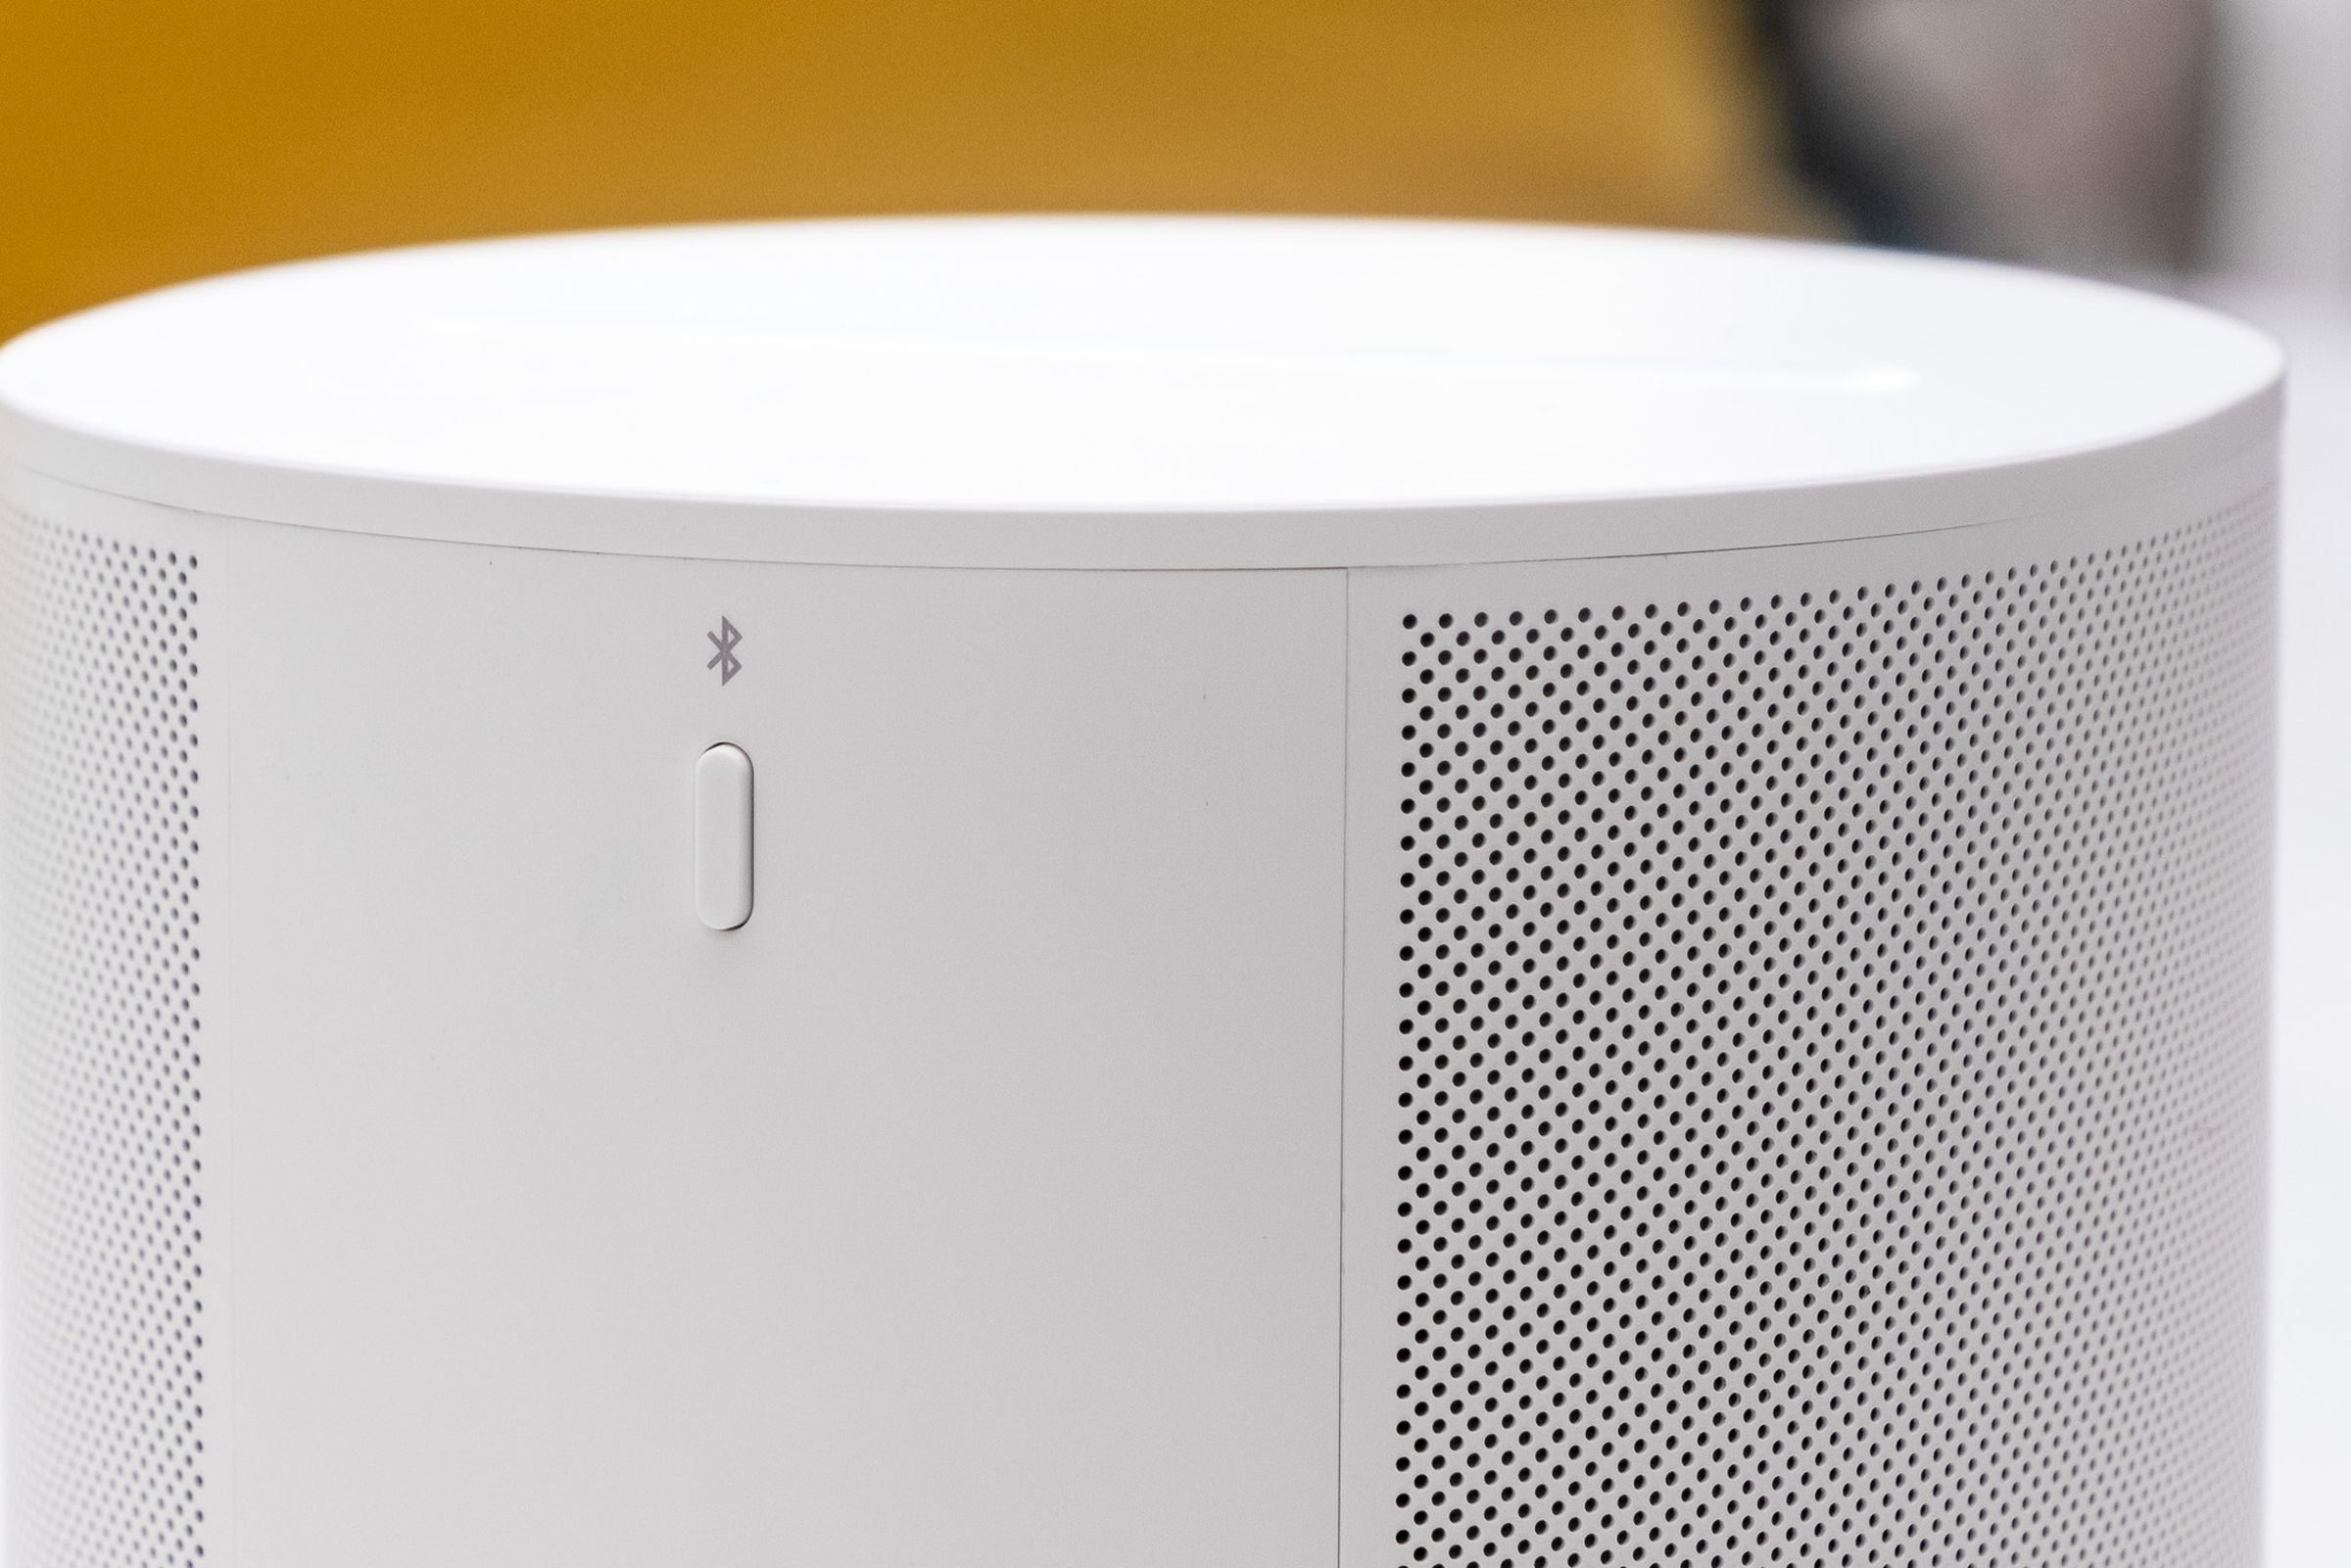 A close-up photo of the Bluetooth button on the Sonos Era 100.